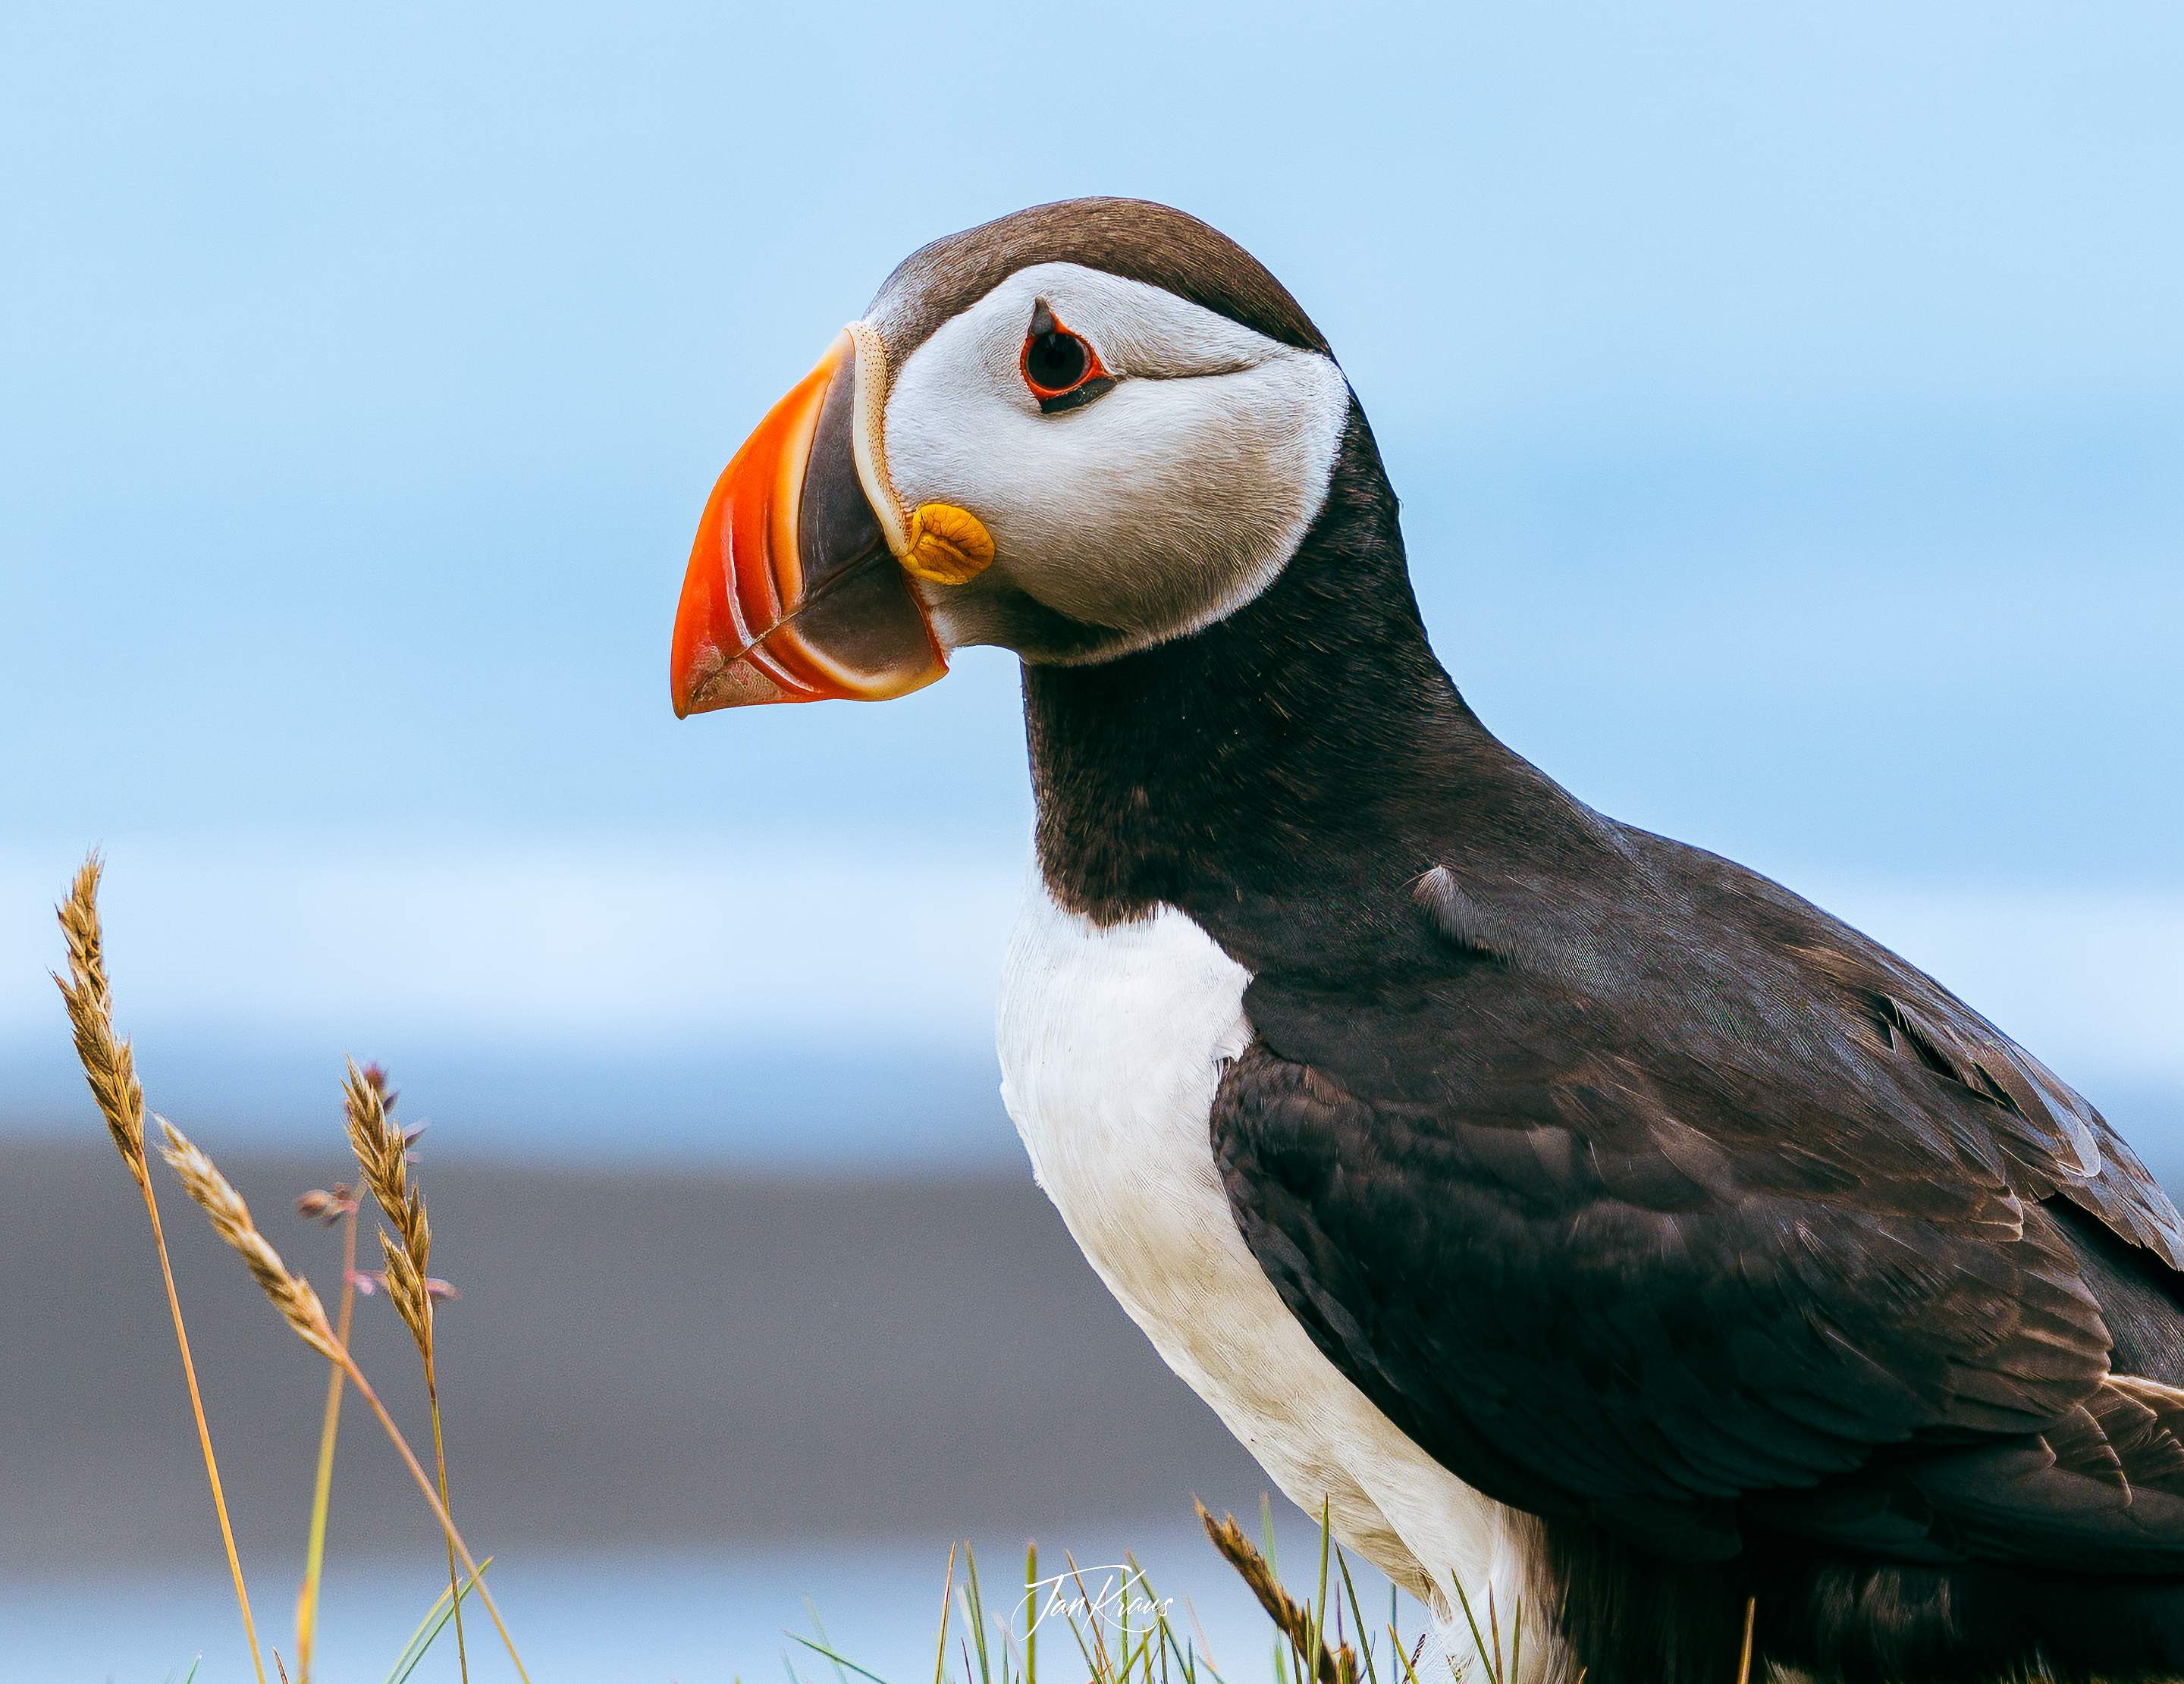 A close-up look at colourful Puffin's beak at Dyrhólaey nature reserve, Iceland